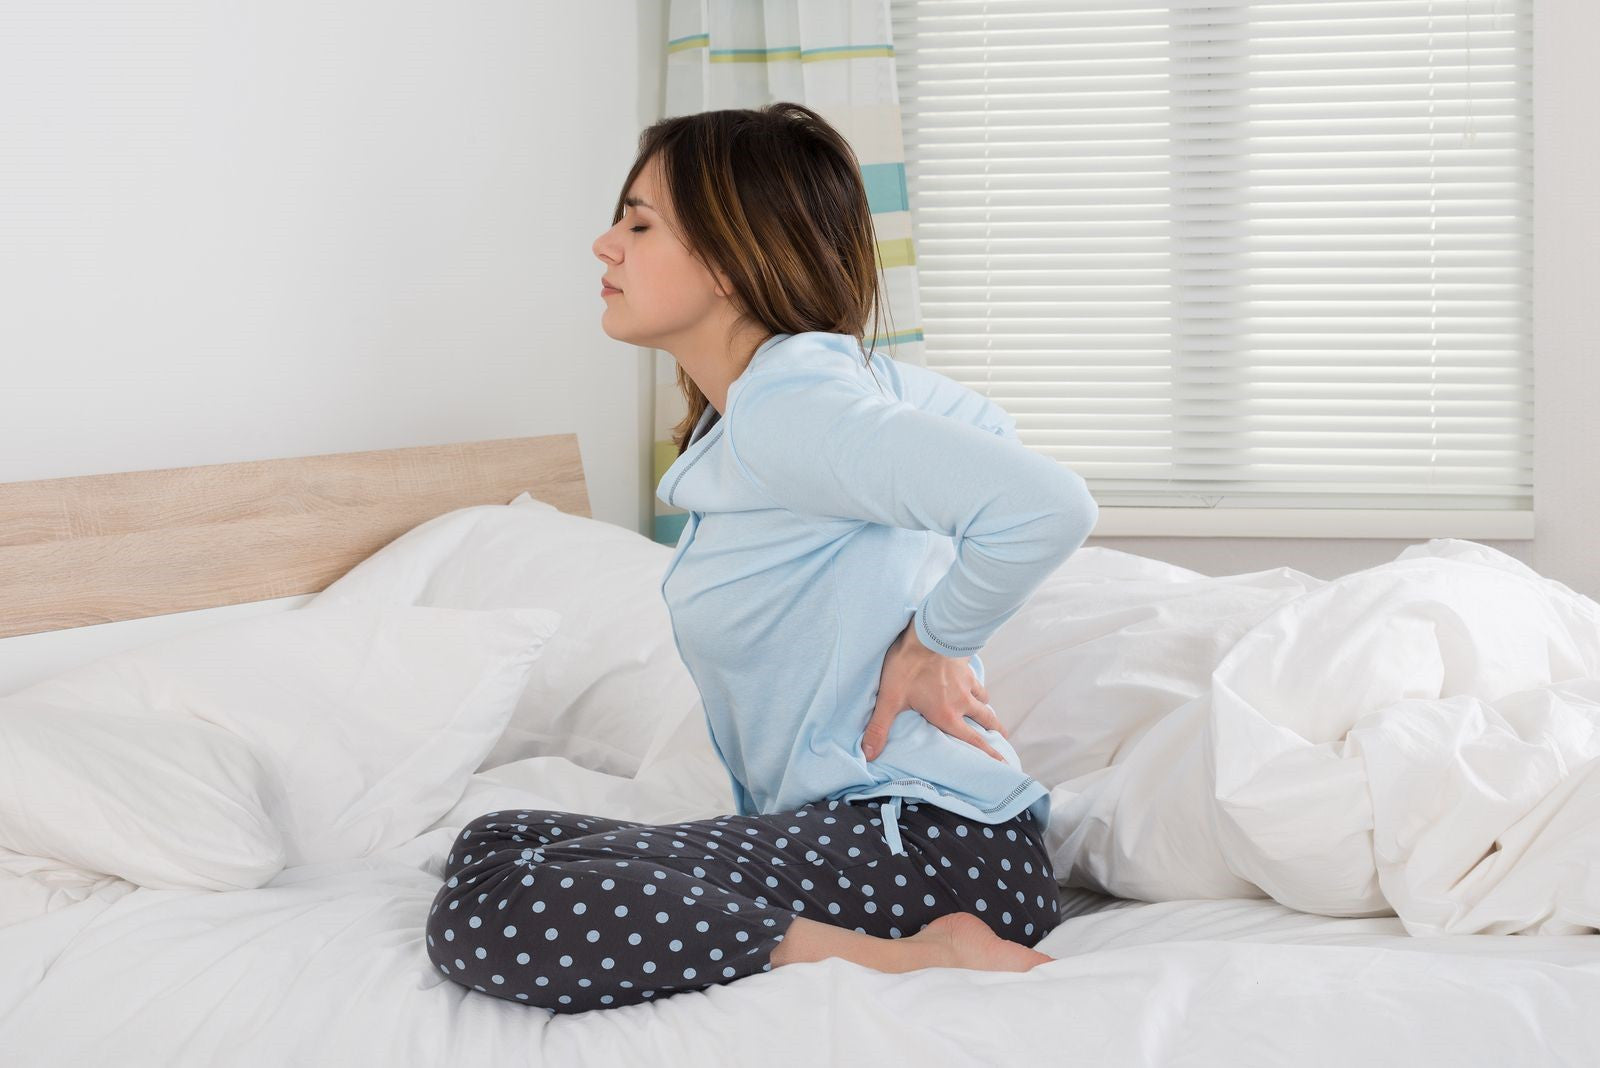 Sleeping On An Organic Latex Mattress Helps You Deal with Back Pain